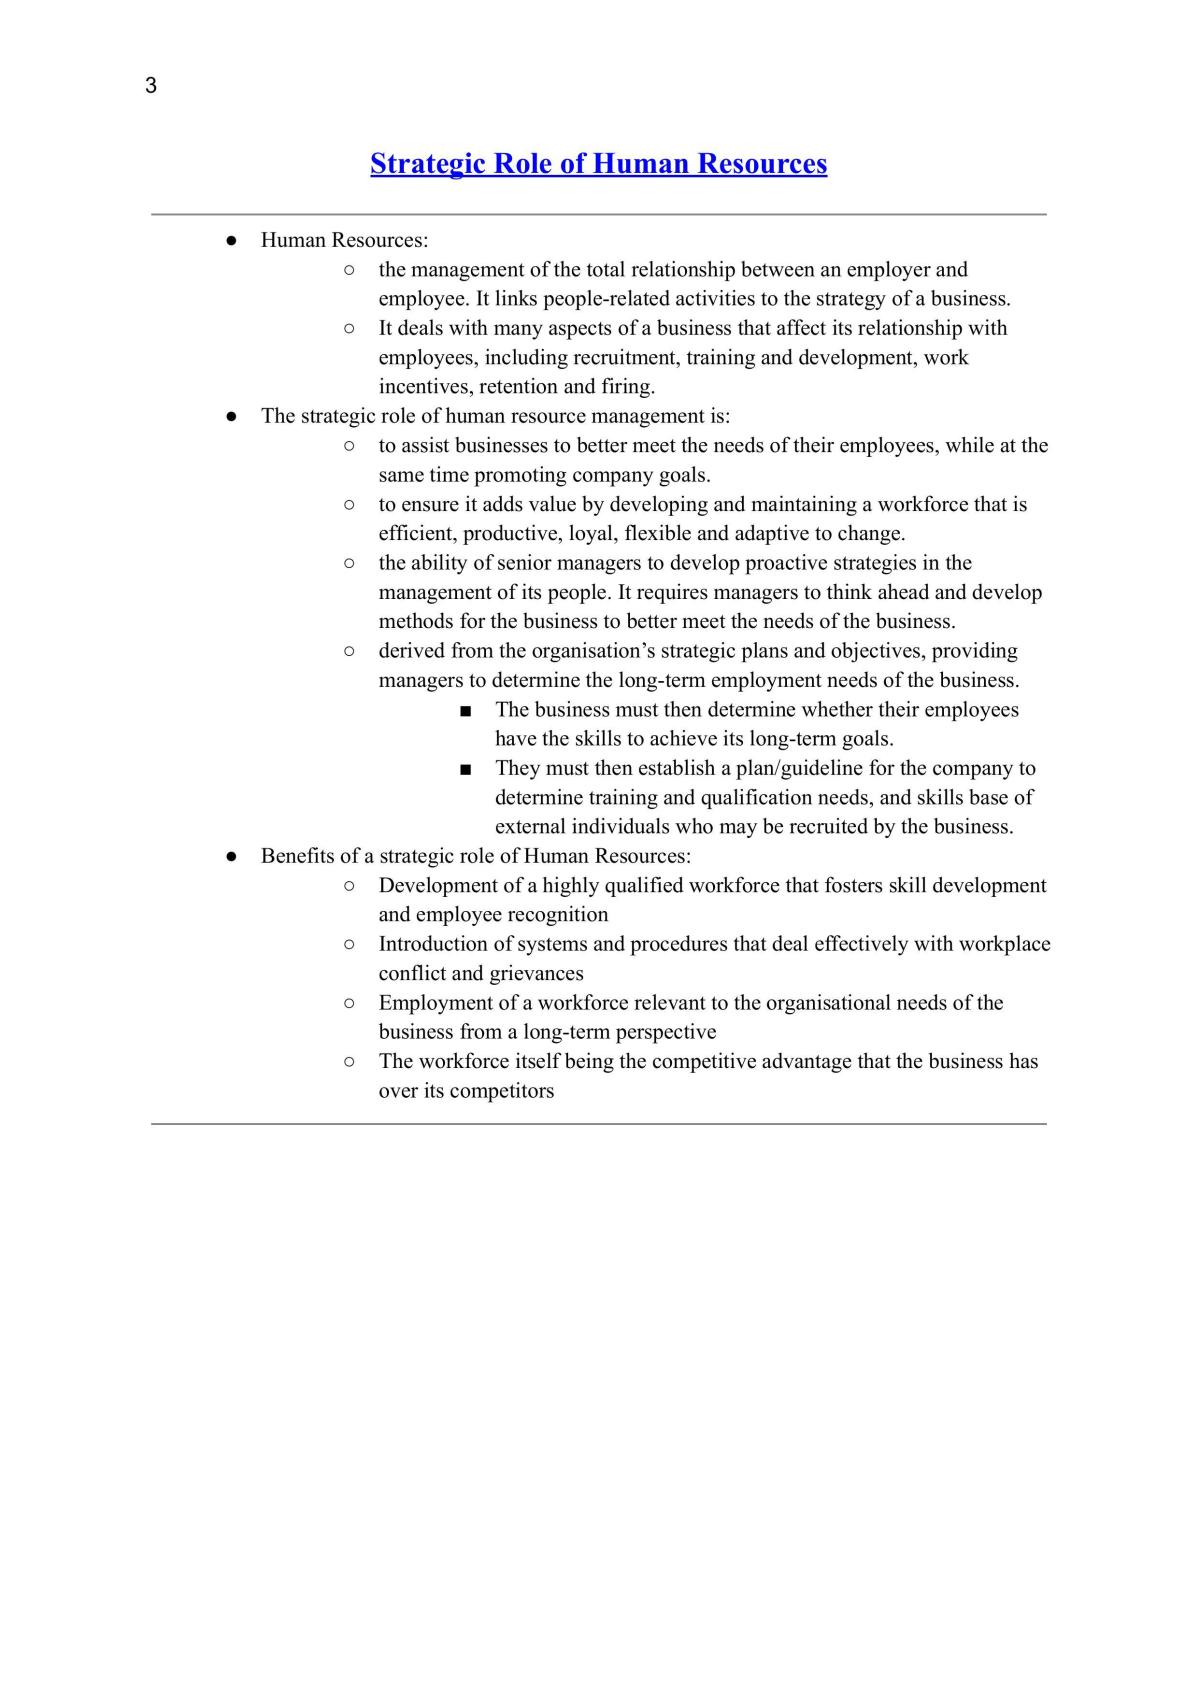 Human Resources Topic Notes - Page 3